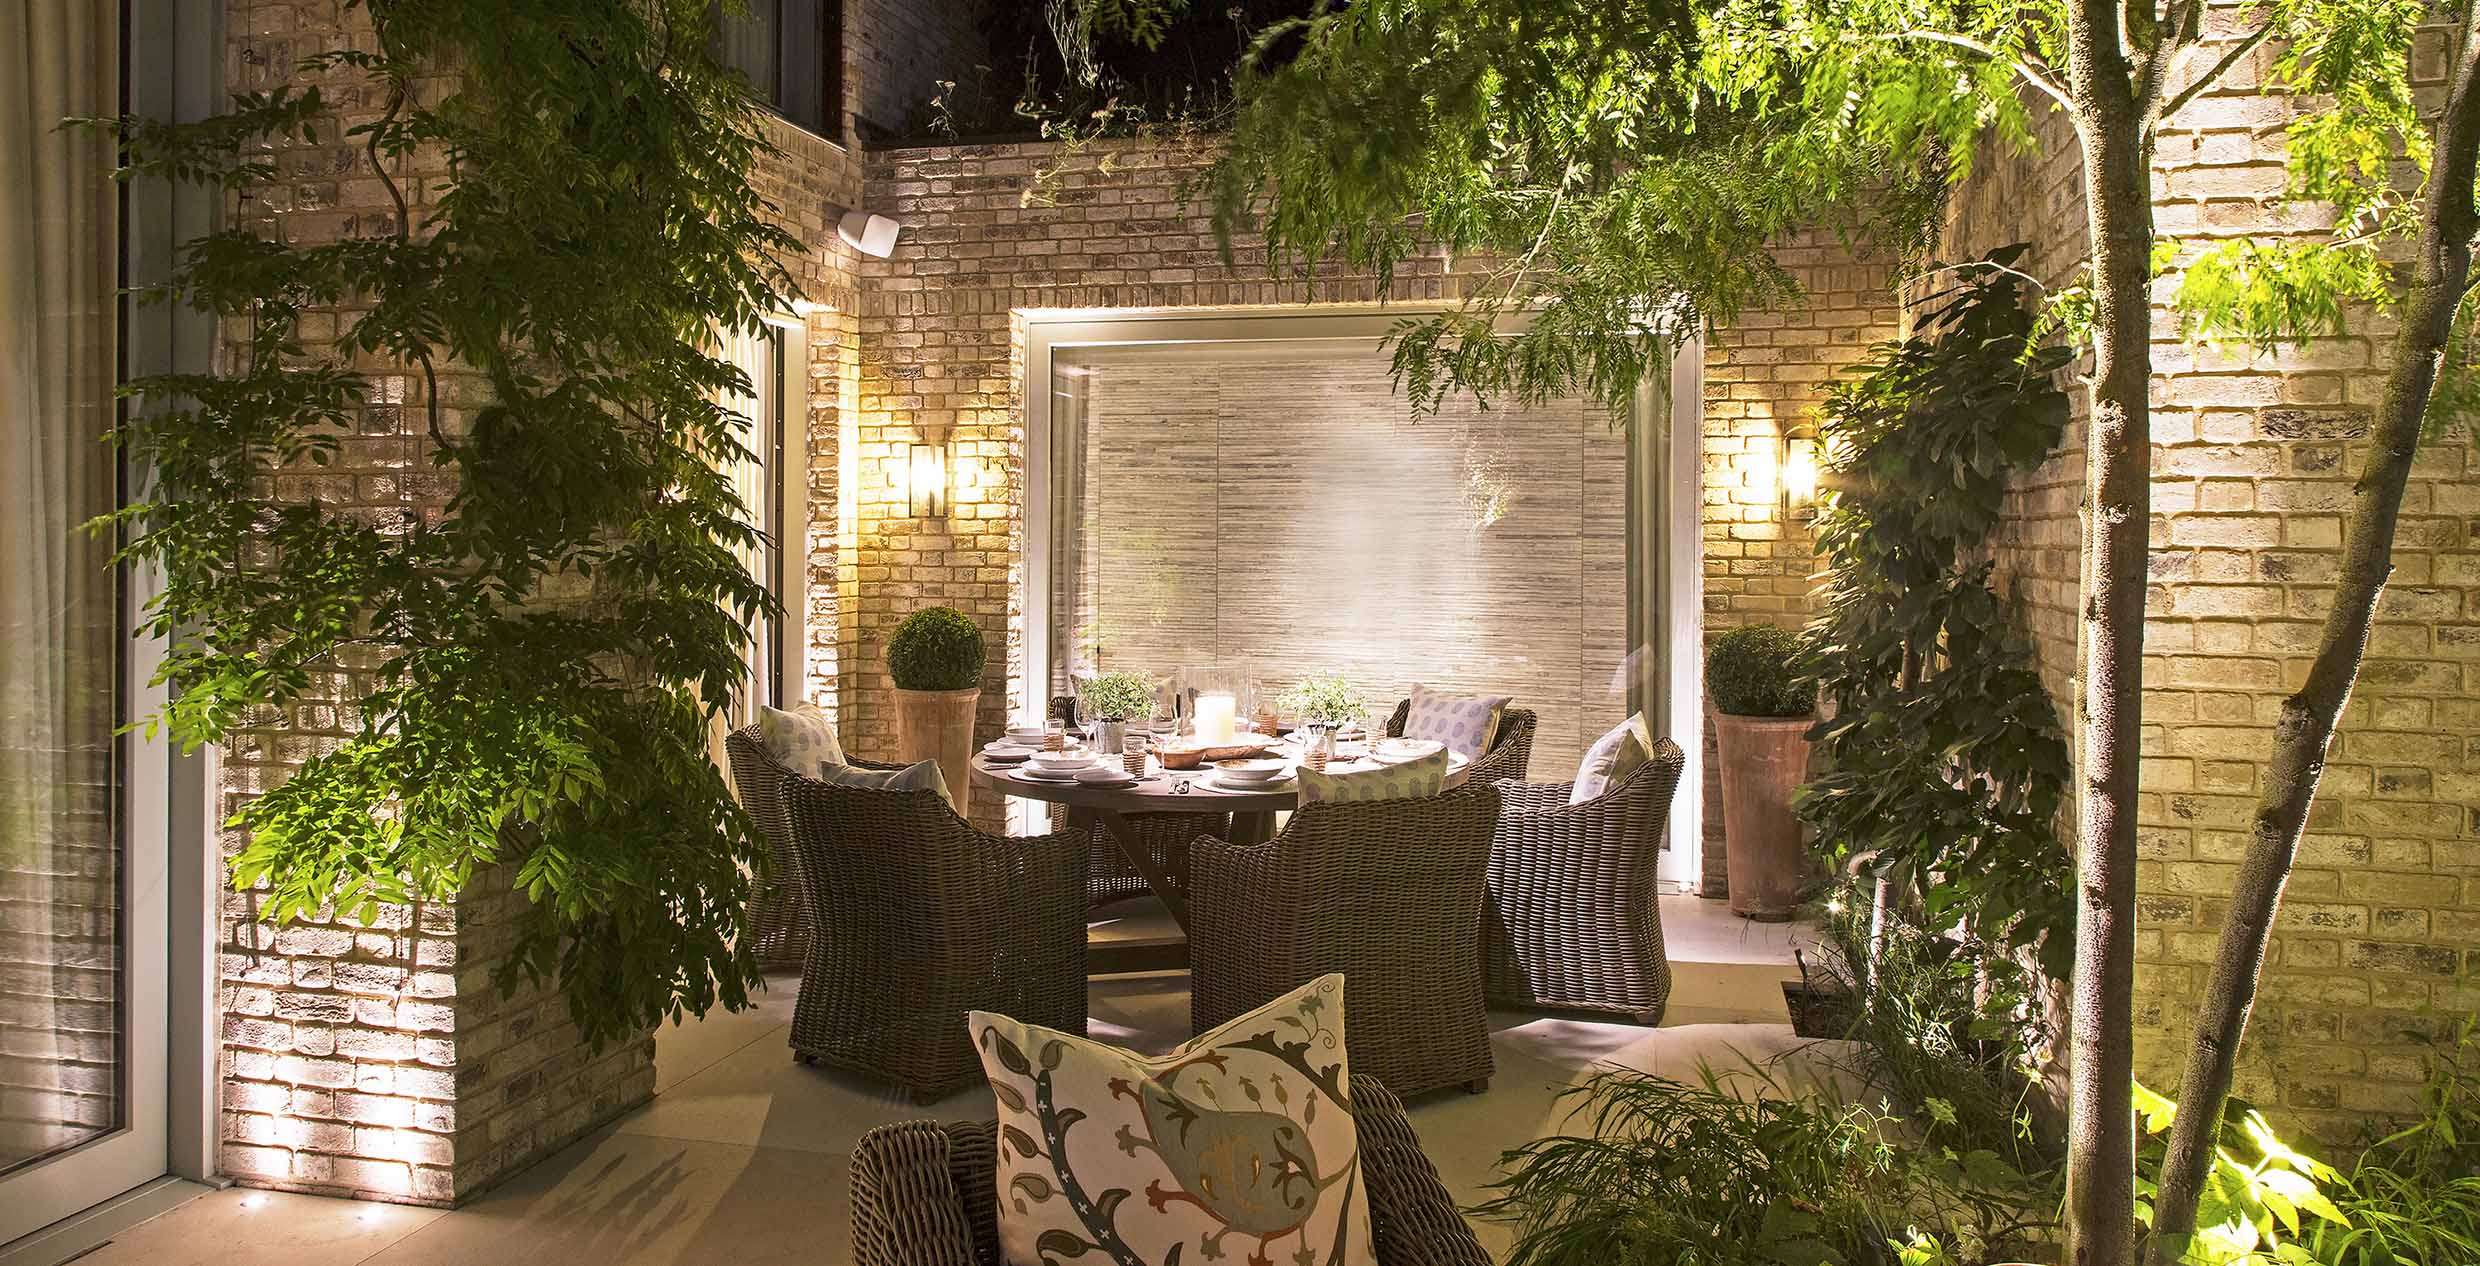 inviting alfresco dining scene with lanterns and uplit structure